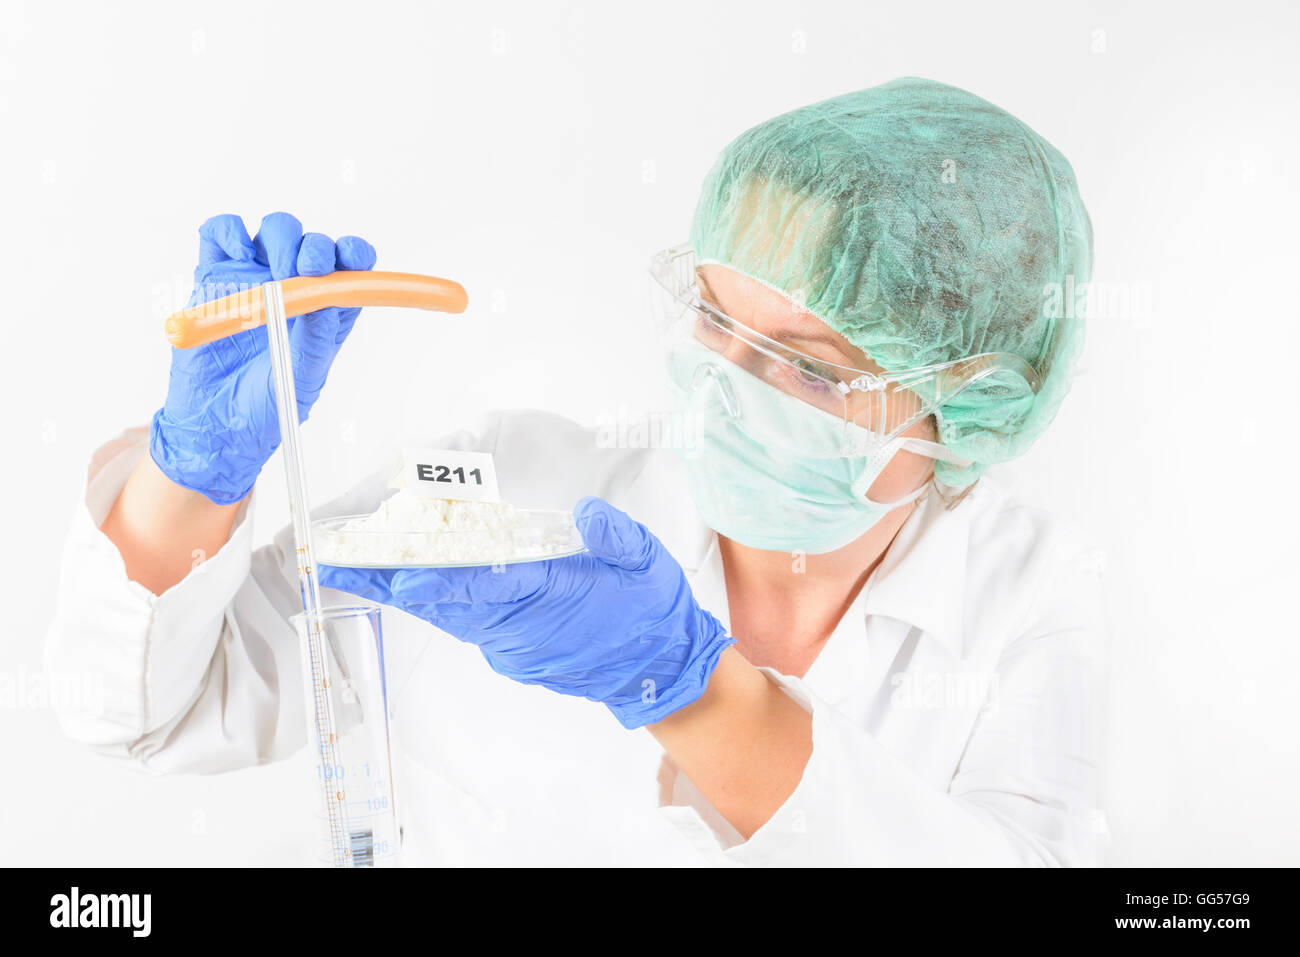 Researcher presenting preservatives substances that are added to products such as foods, pharmaceuticals, paints, biological sam Stock Photo